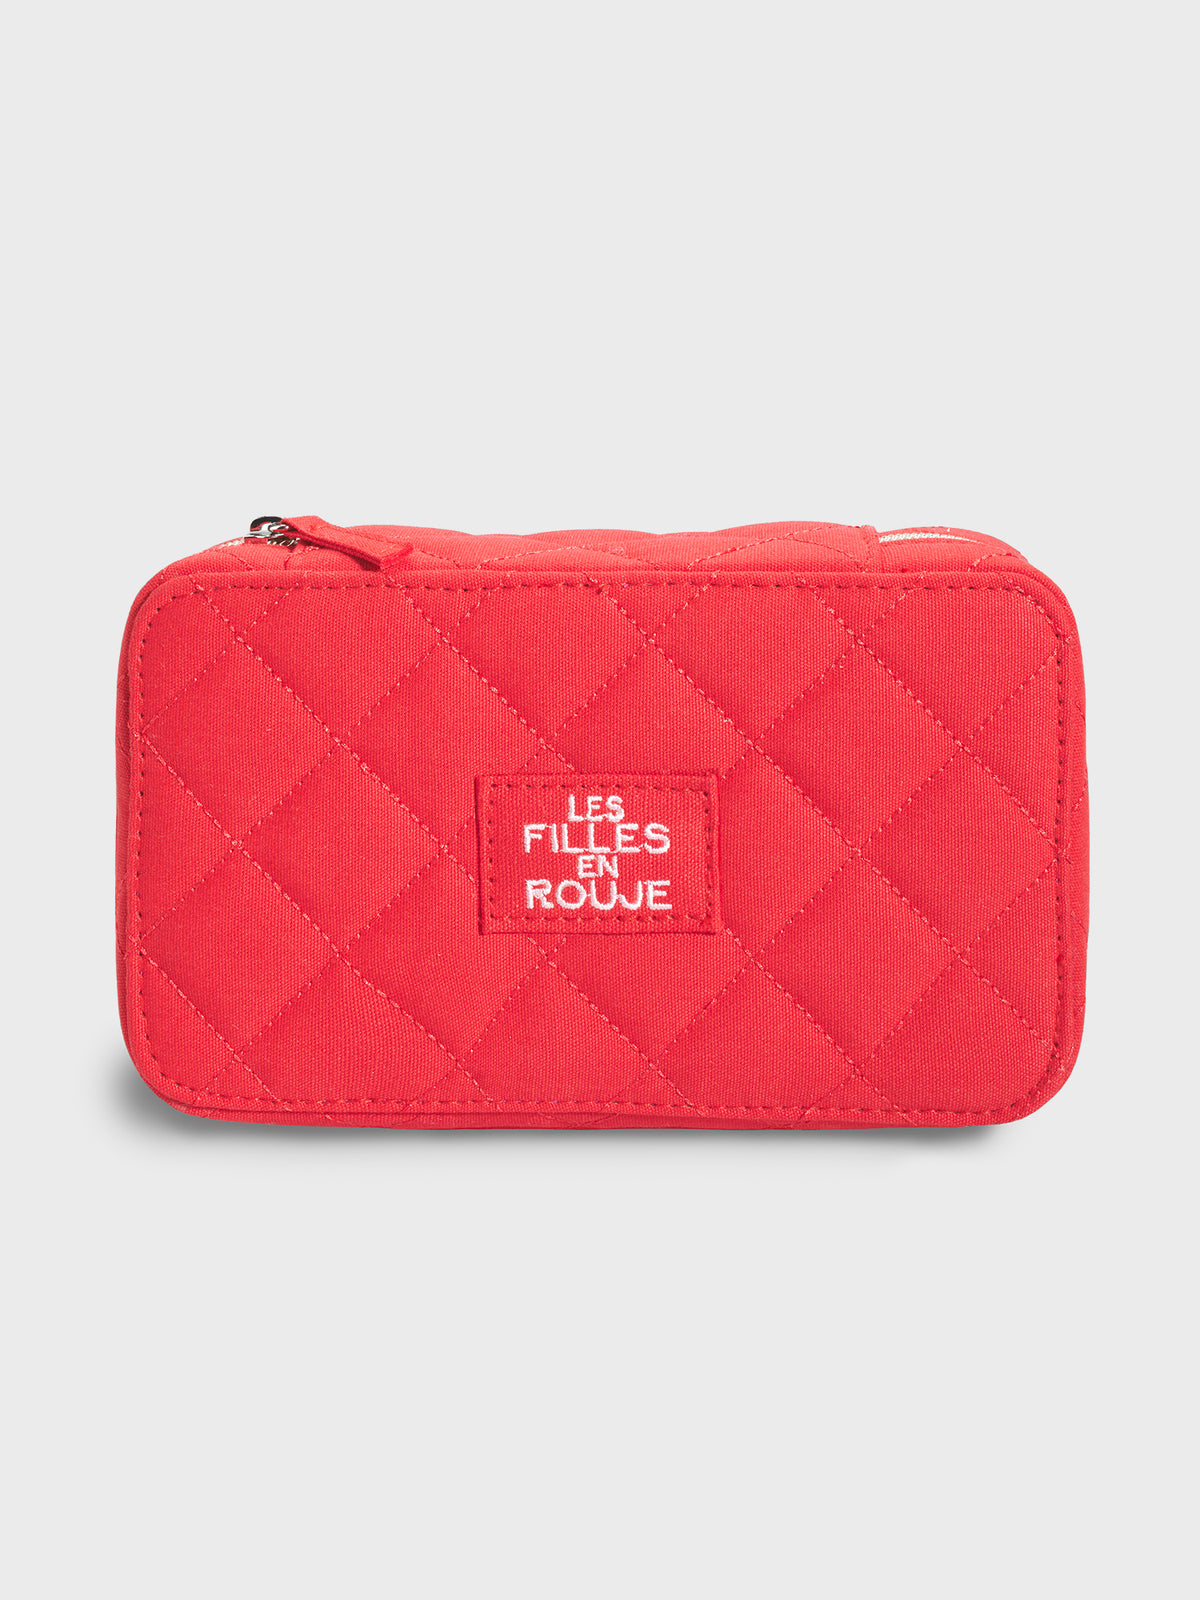 The Red Pouch